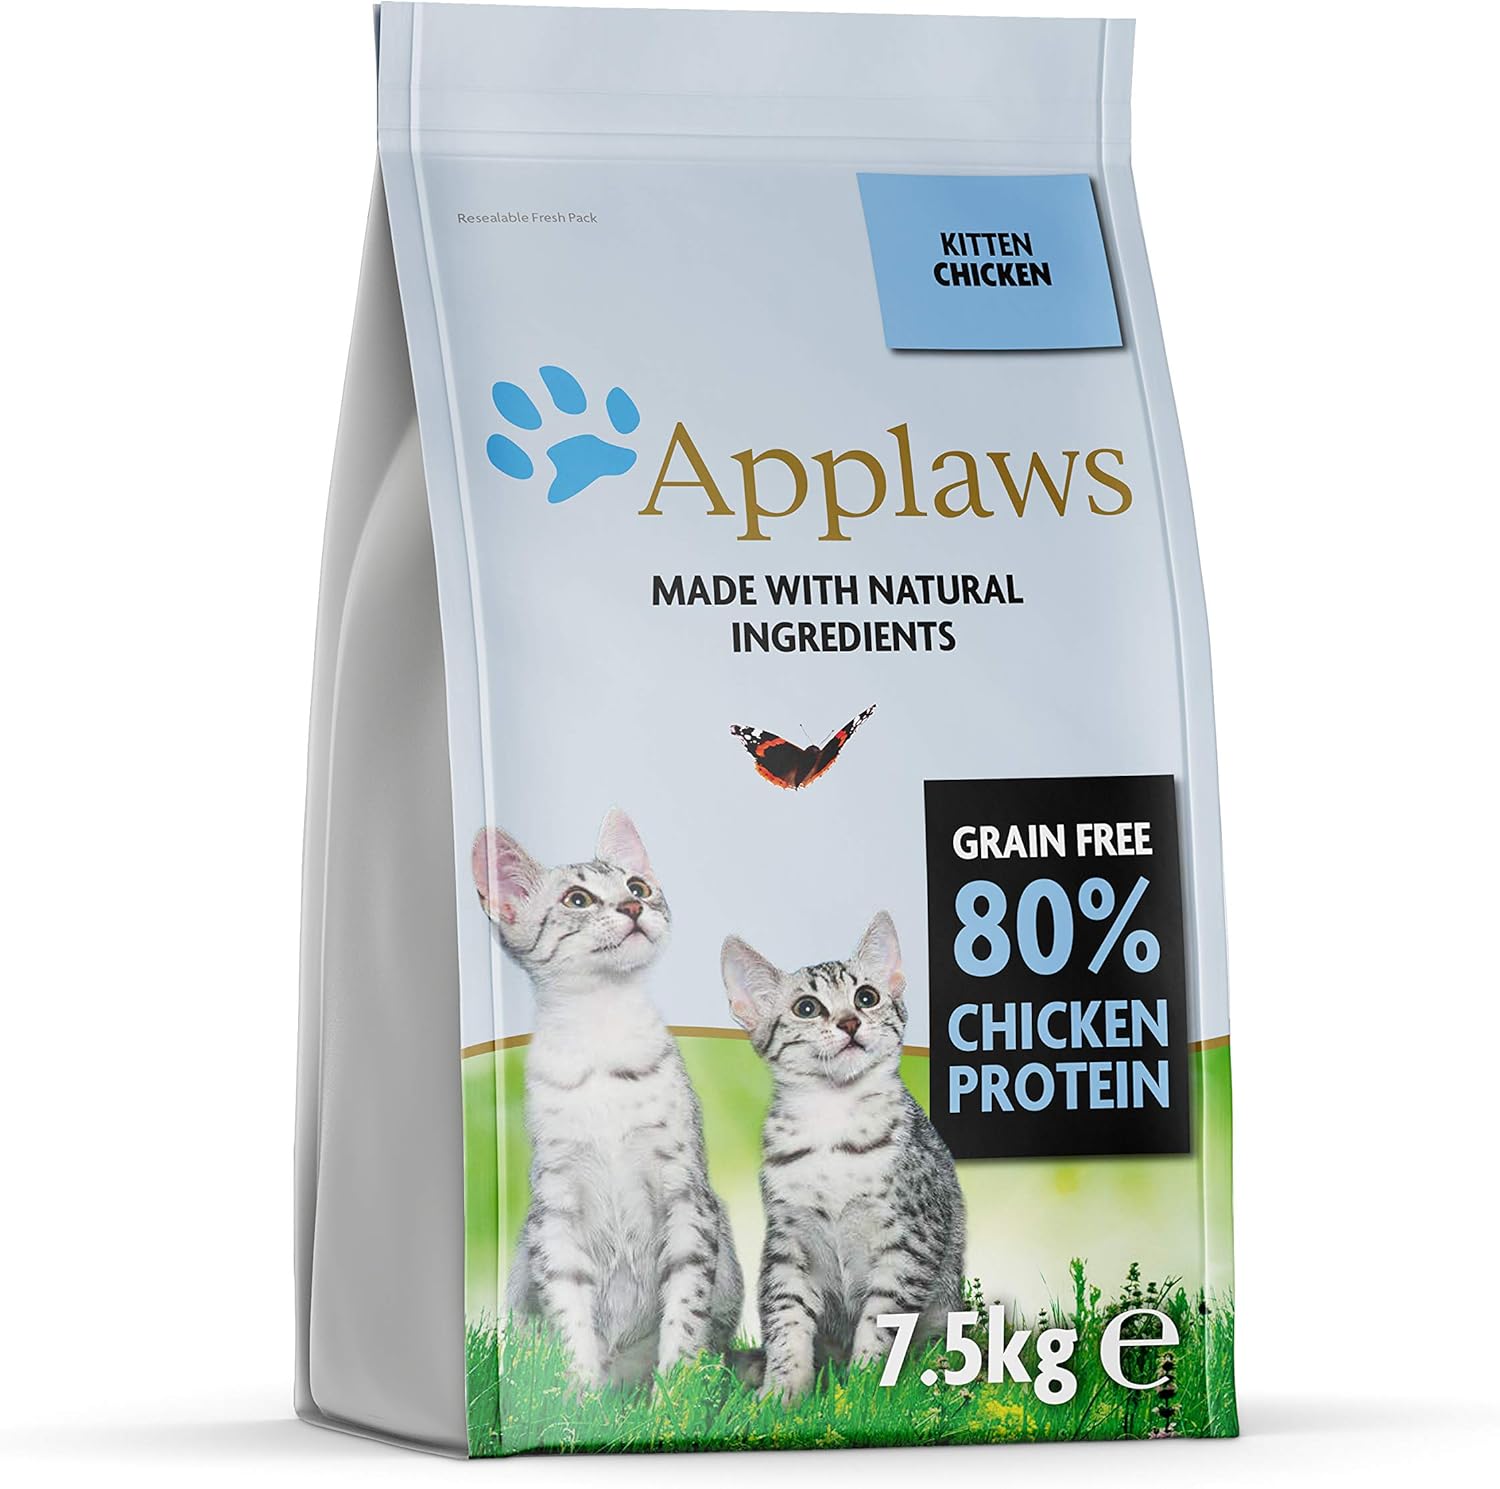 Applaws Complete Natural and Grain Free Dry Kitten Food, Chicken, 7.5 kg (Pack of 1) (Packaging may vary)?4074